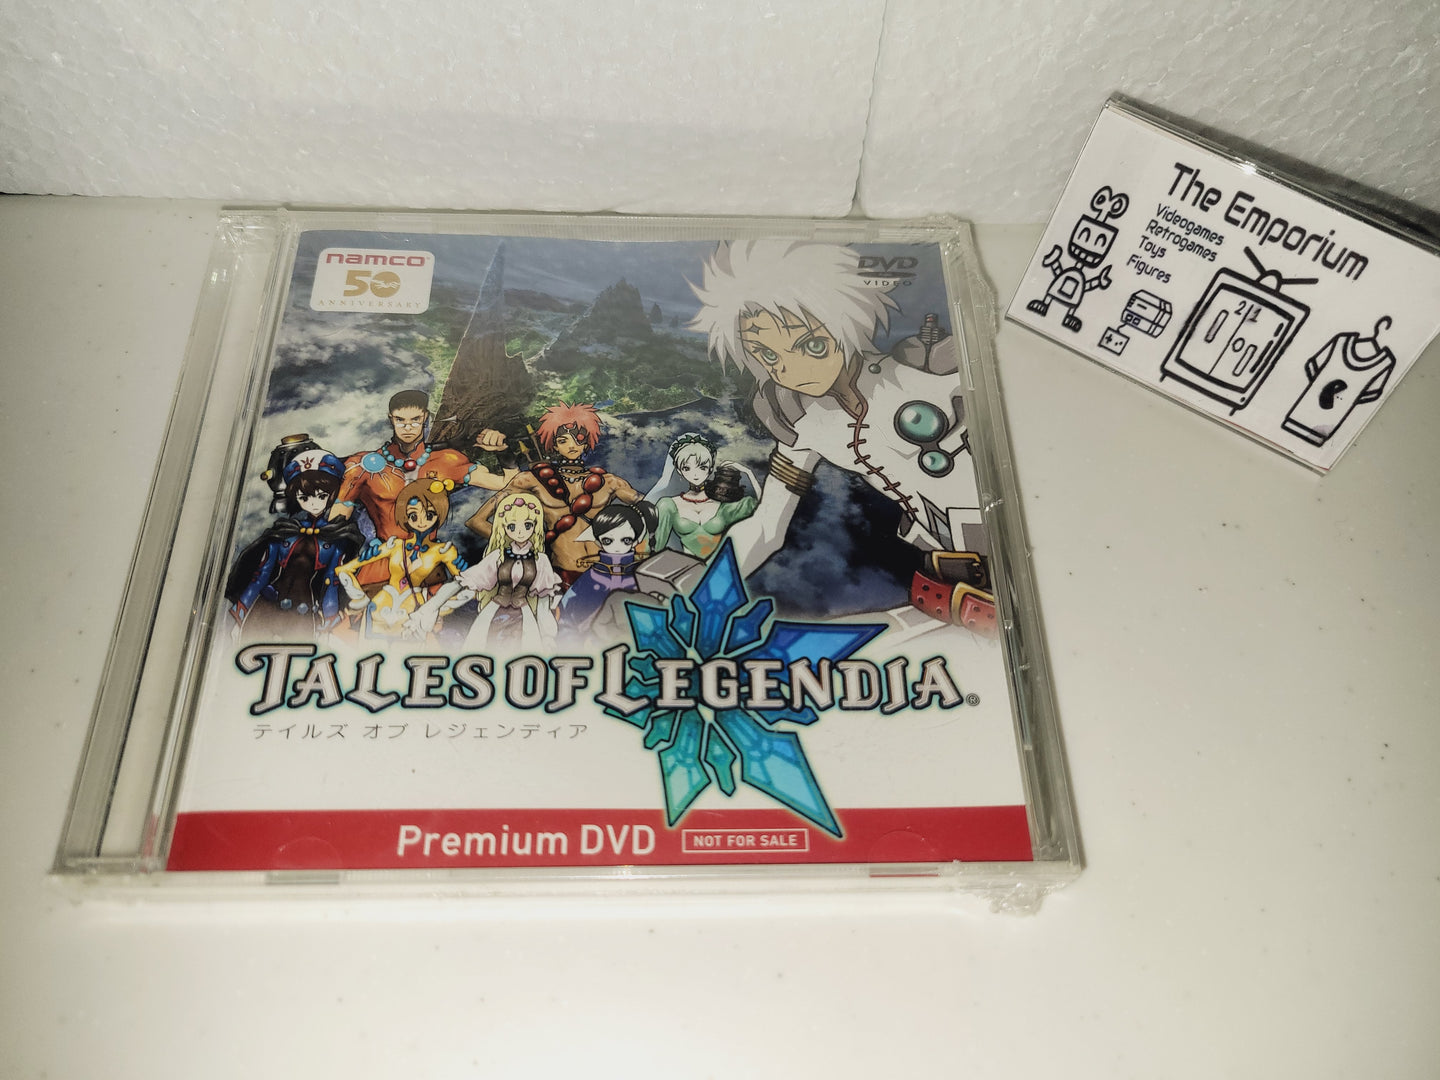 Tales of Legendia promo dvd -not for sale- - dvd video